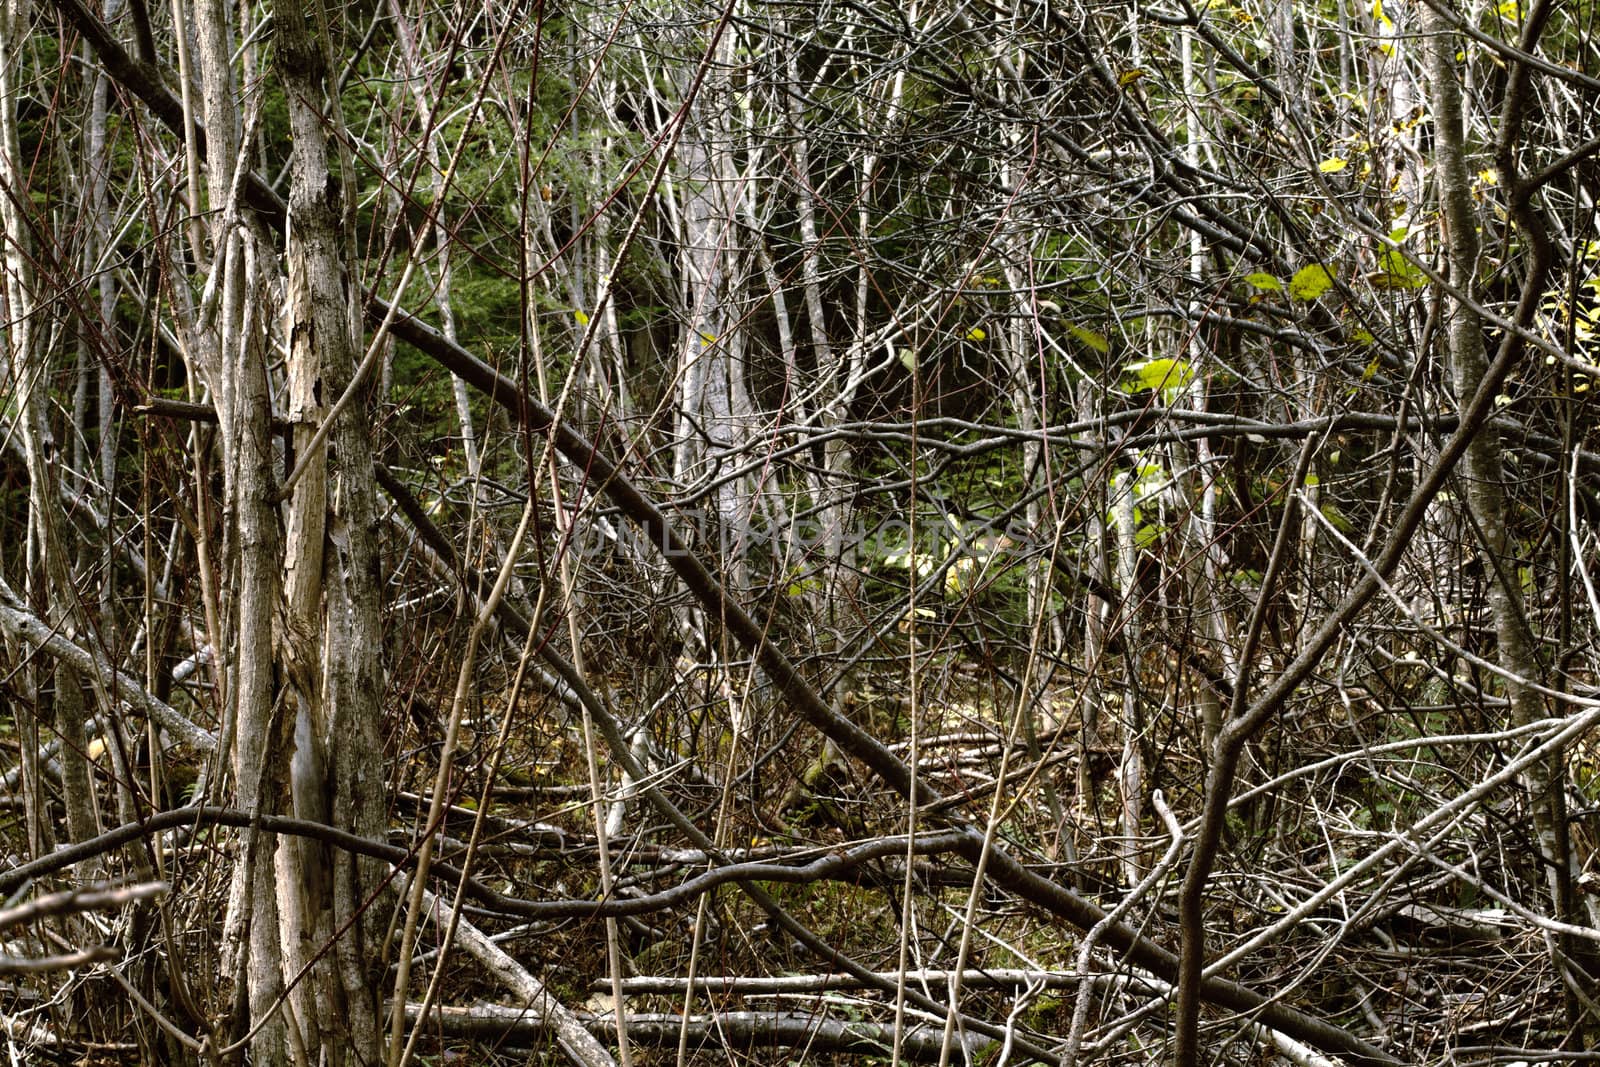 It���s a little funny story. I was actually a bit lost in this forest taking pictures so I decided put my camera on the tripod and take a HDR picture of the dense forest in front of me. It was a cold day of autumn in the Gaspe Peninsula forest. By chance I found my way back home !